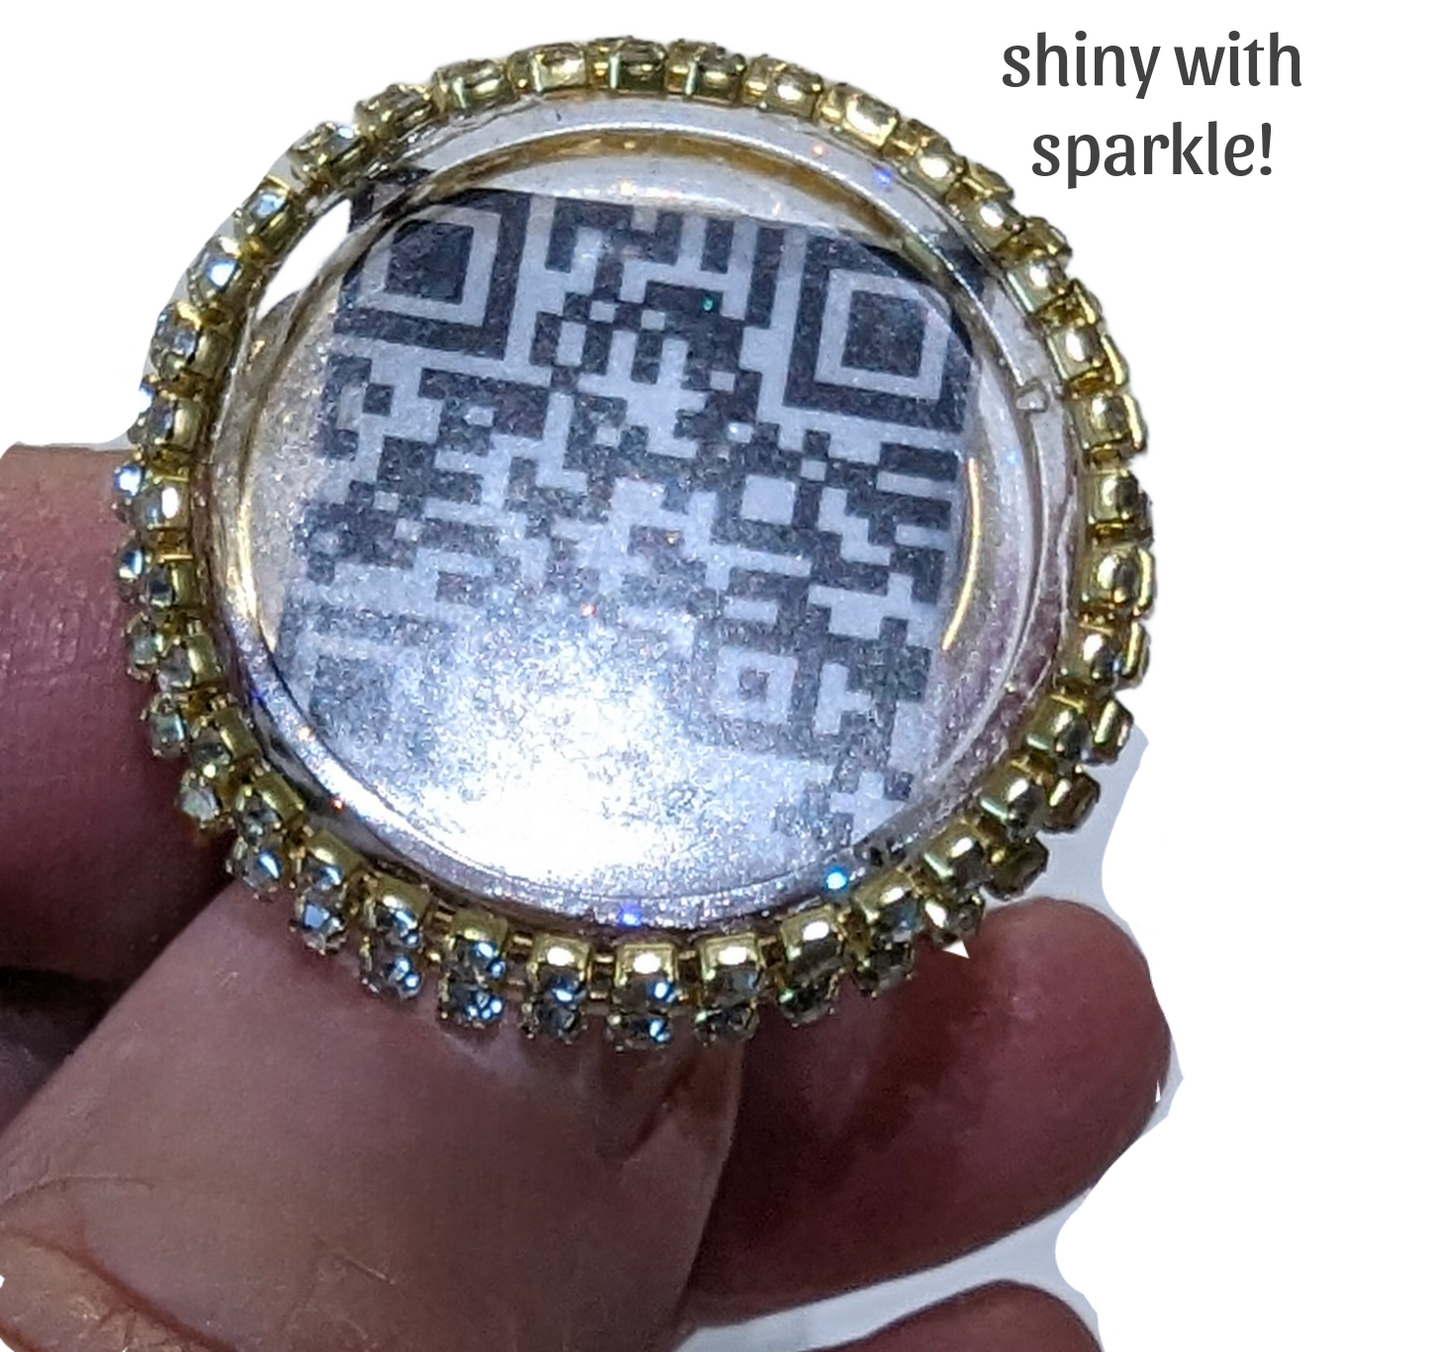 Your QR Code is made into a Ring with adjustable sizing Gold-Plated US Made Sugar Gay Isber